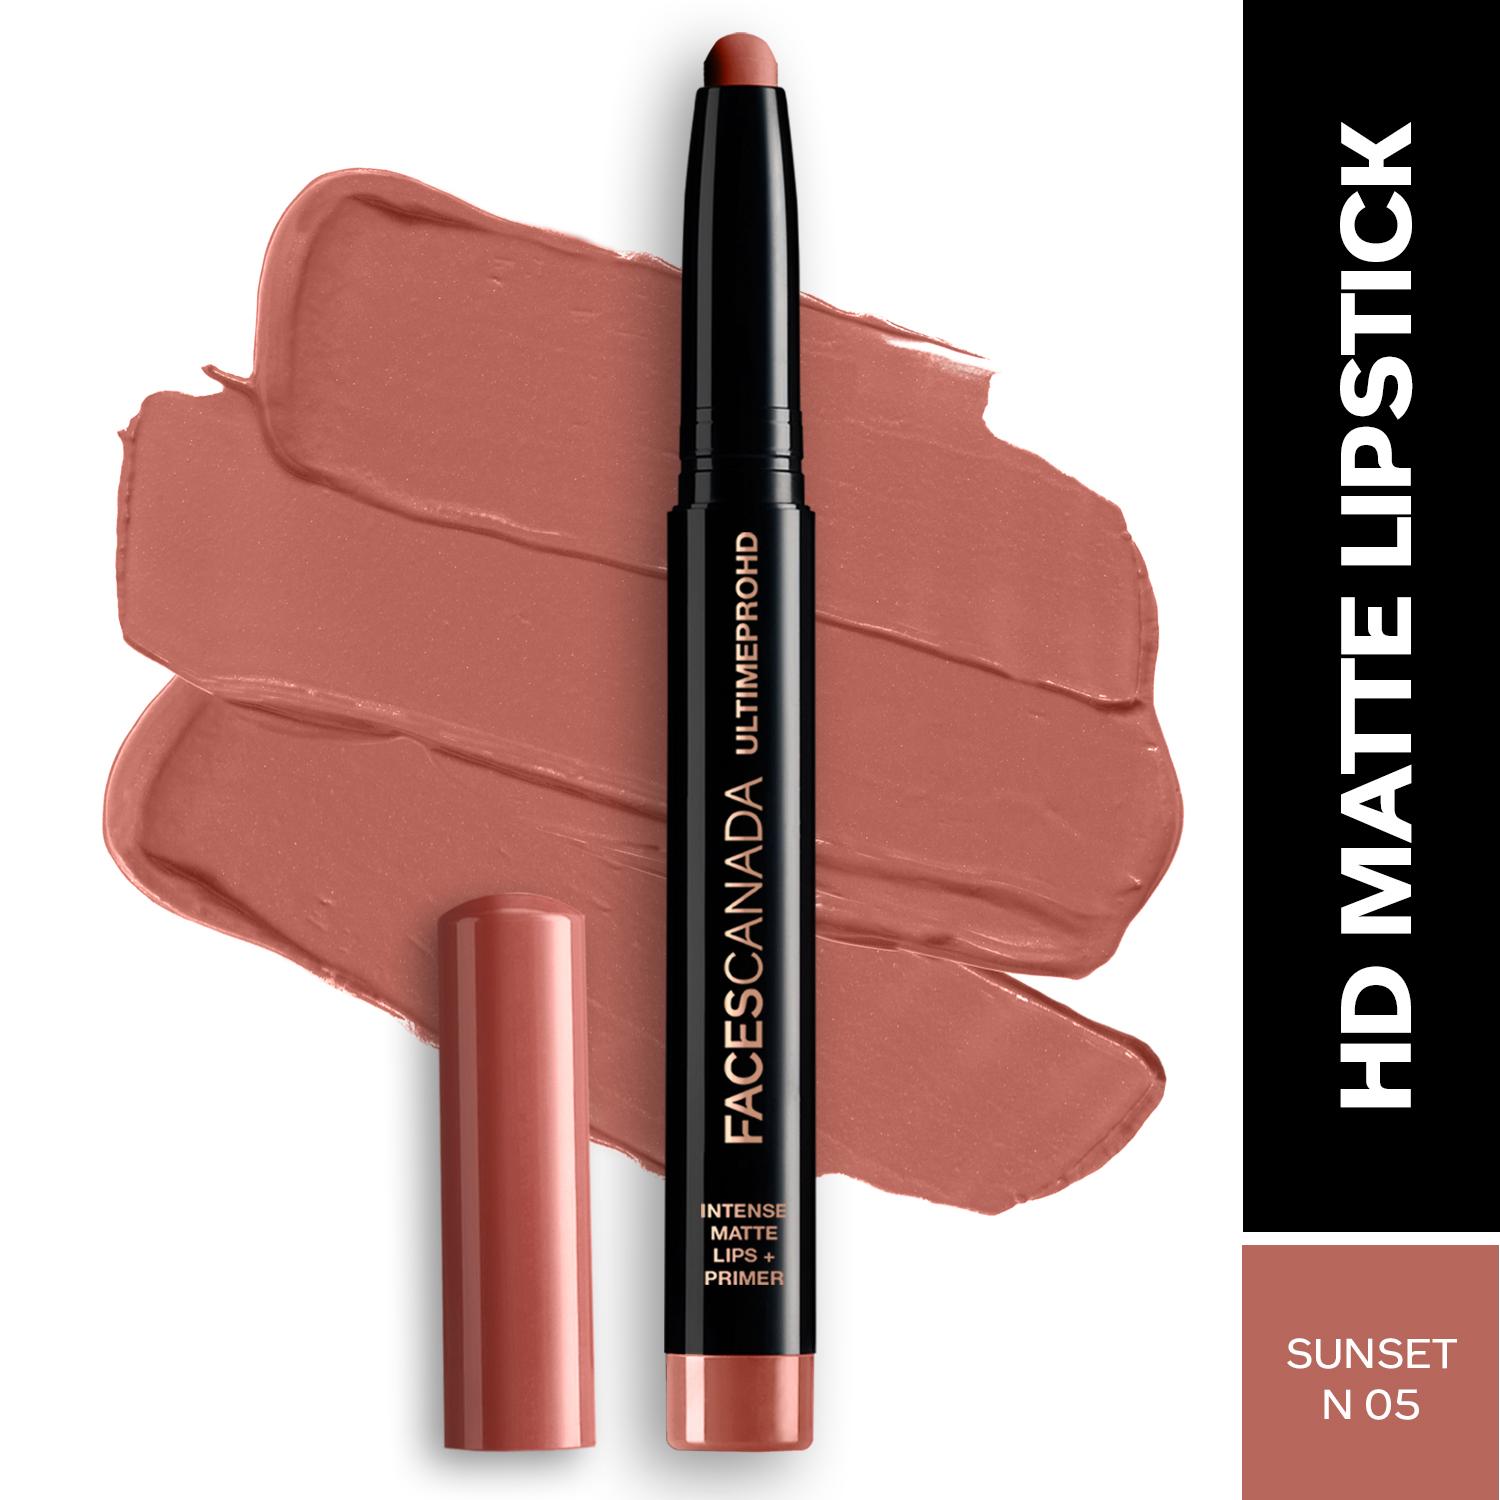 Faces Canada | Faces Canada Ultime Pro HD Intense Matte Lips + Primer - Sunset N05 (1.4 g)